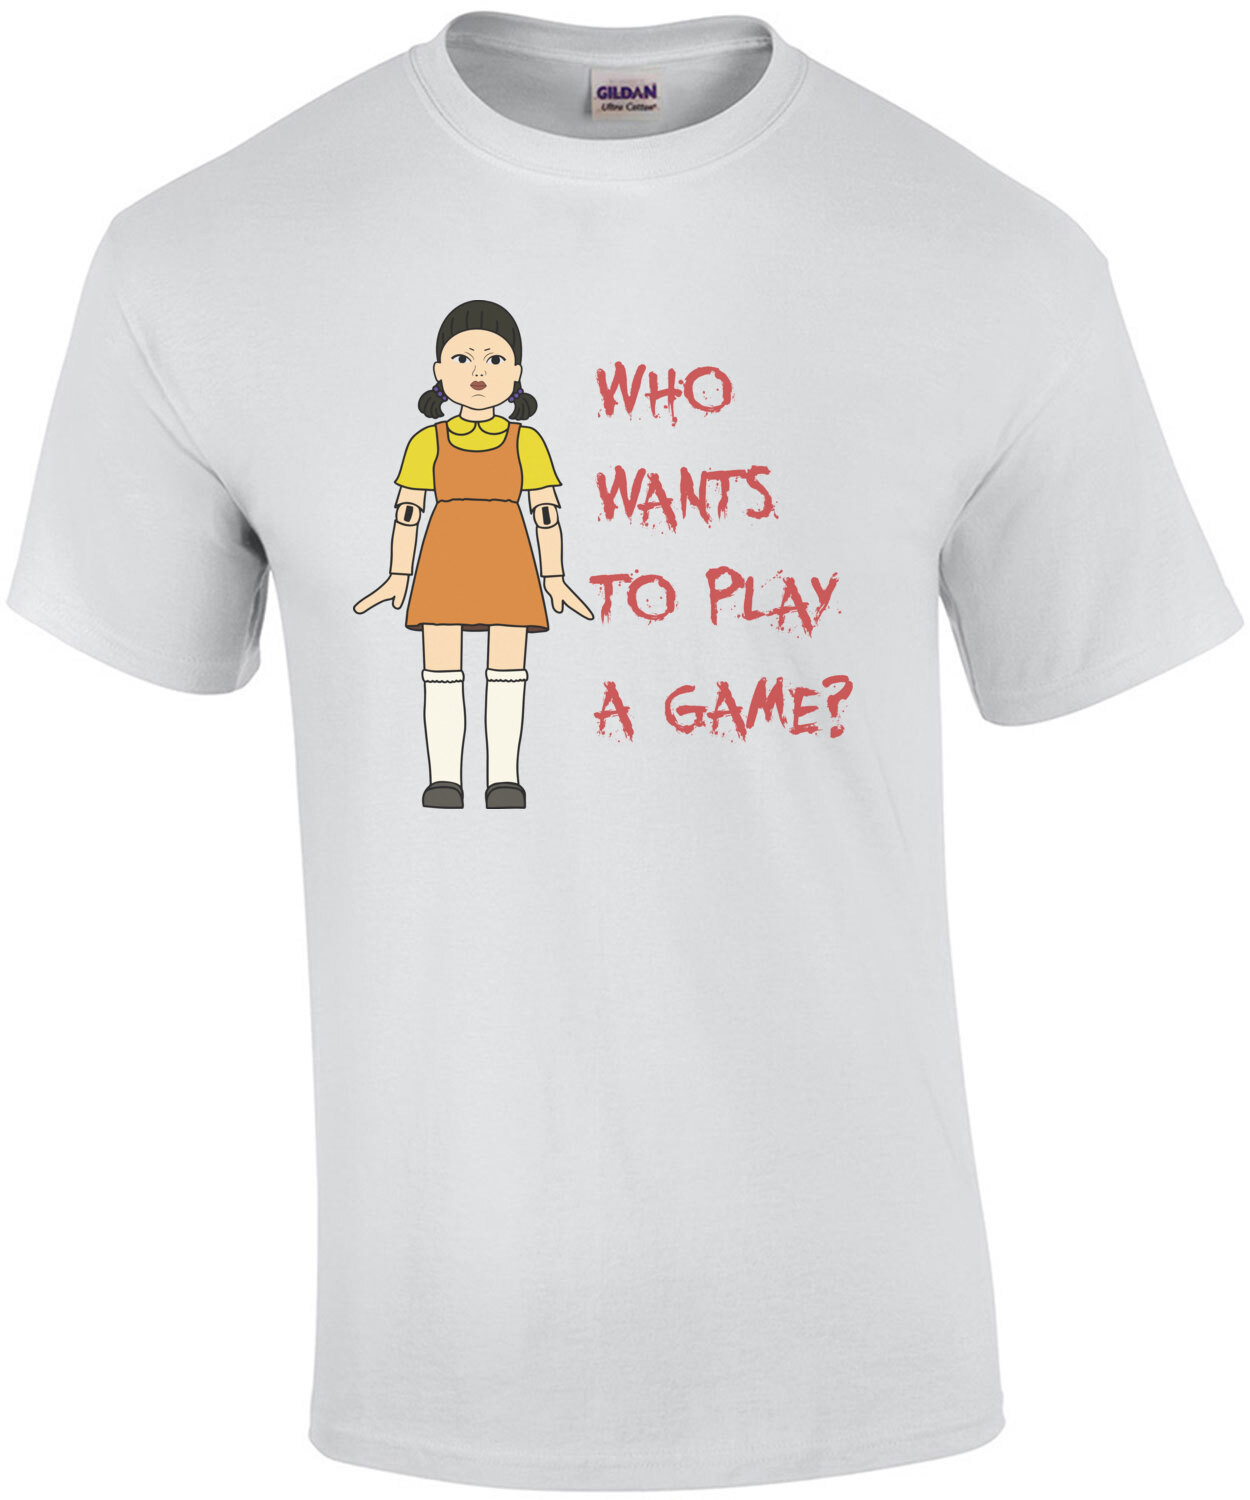 Who Wants To Play A Game? Squid Game T-Shirt